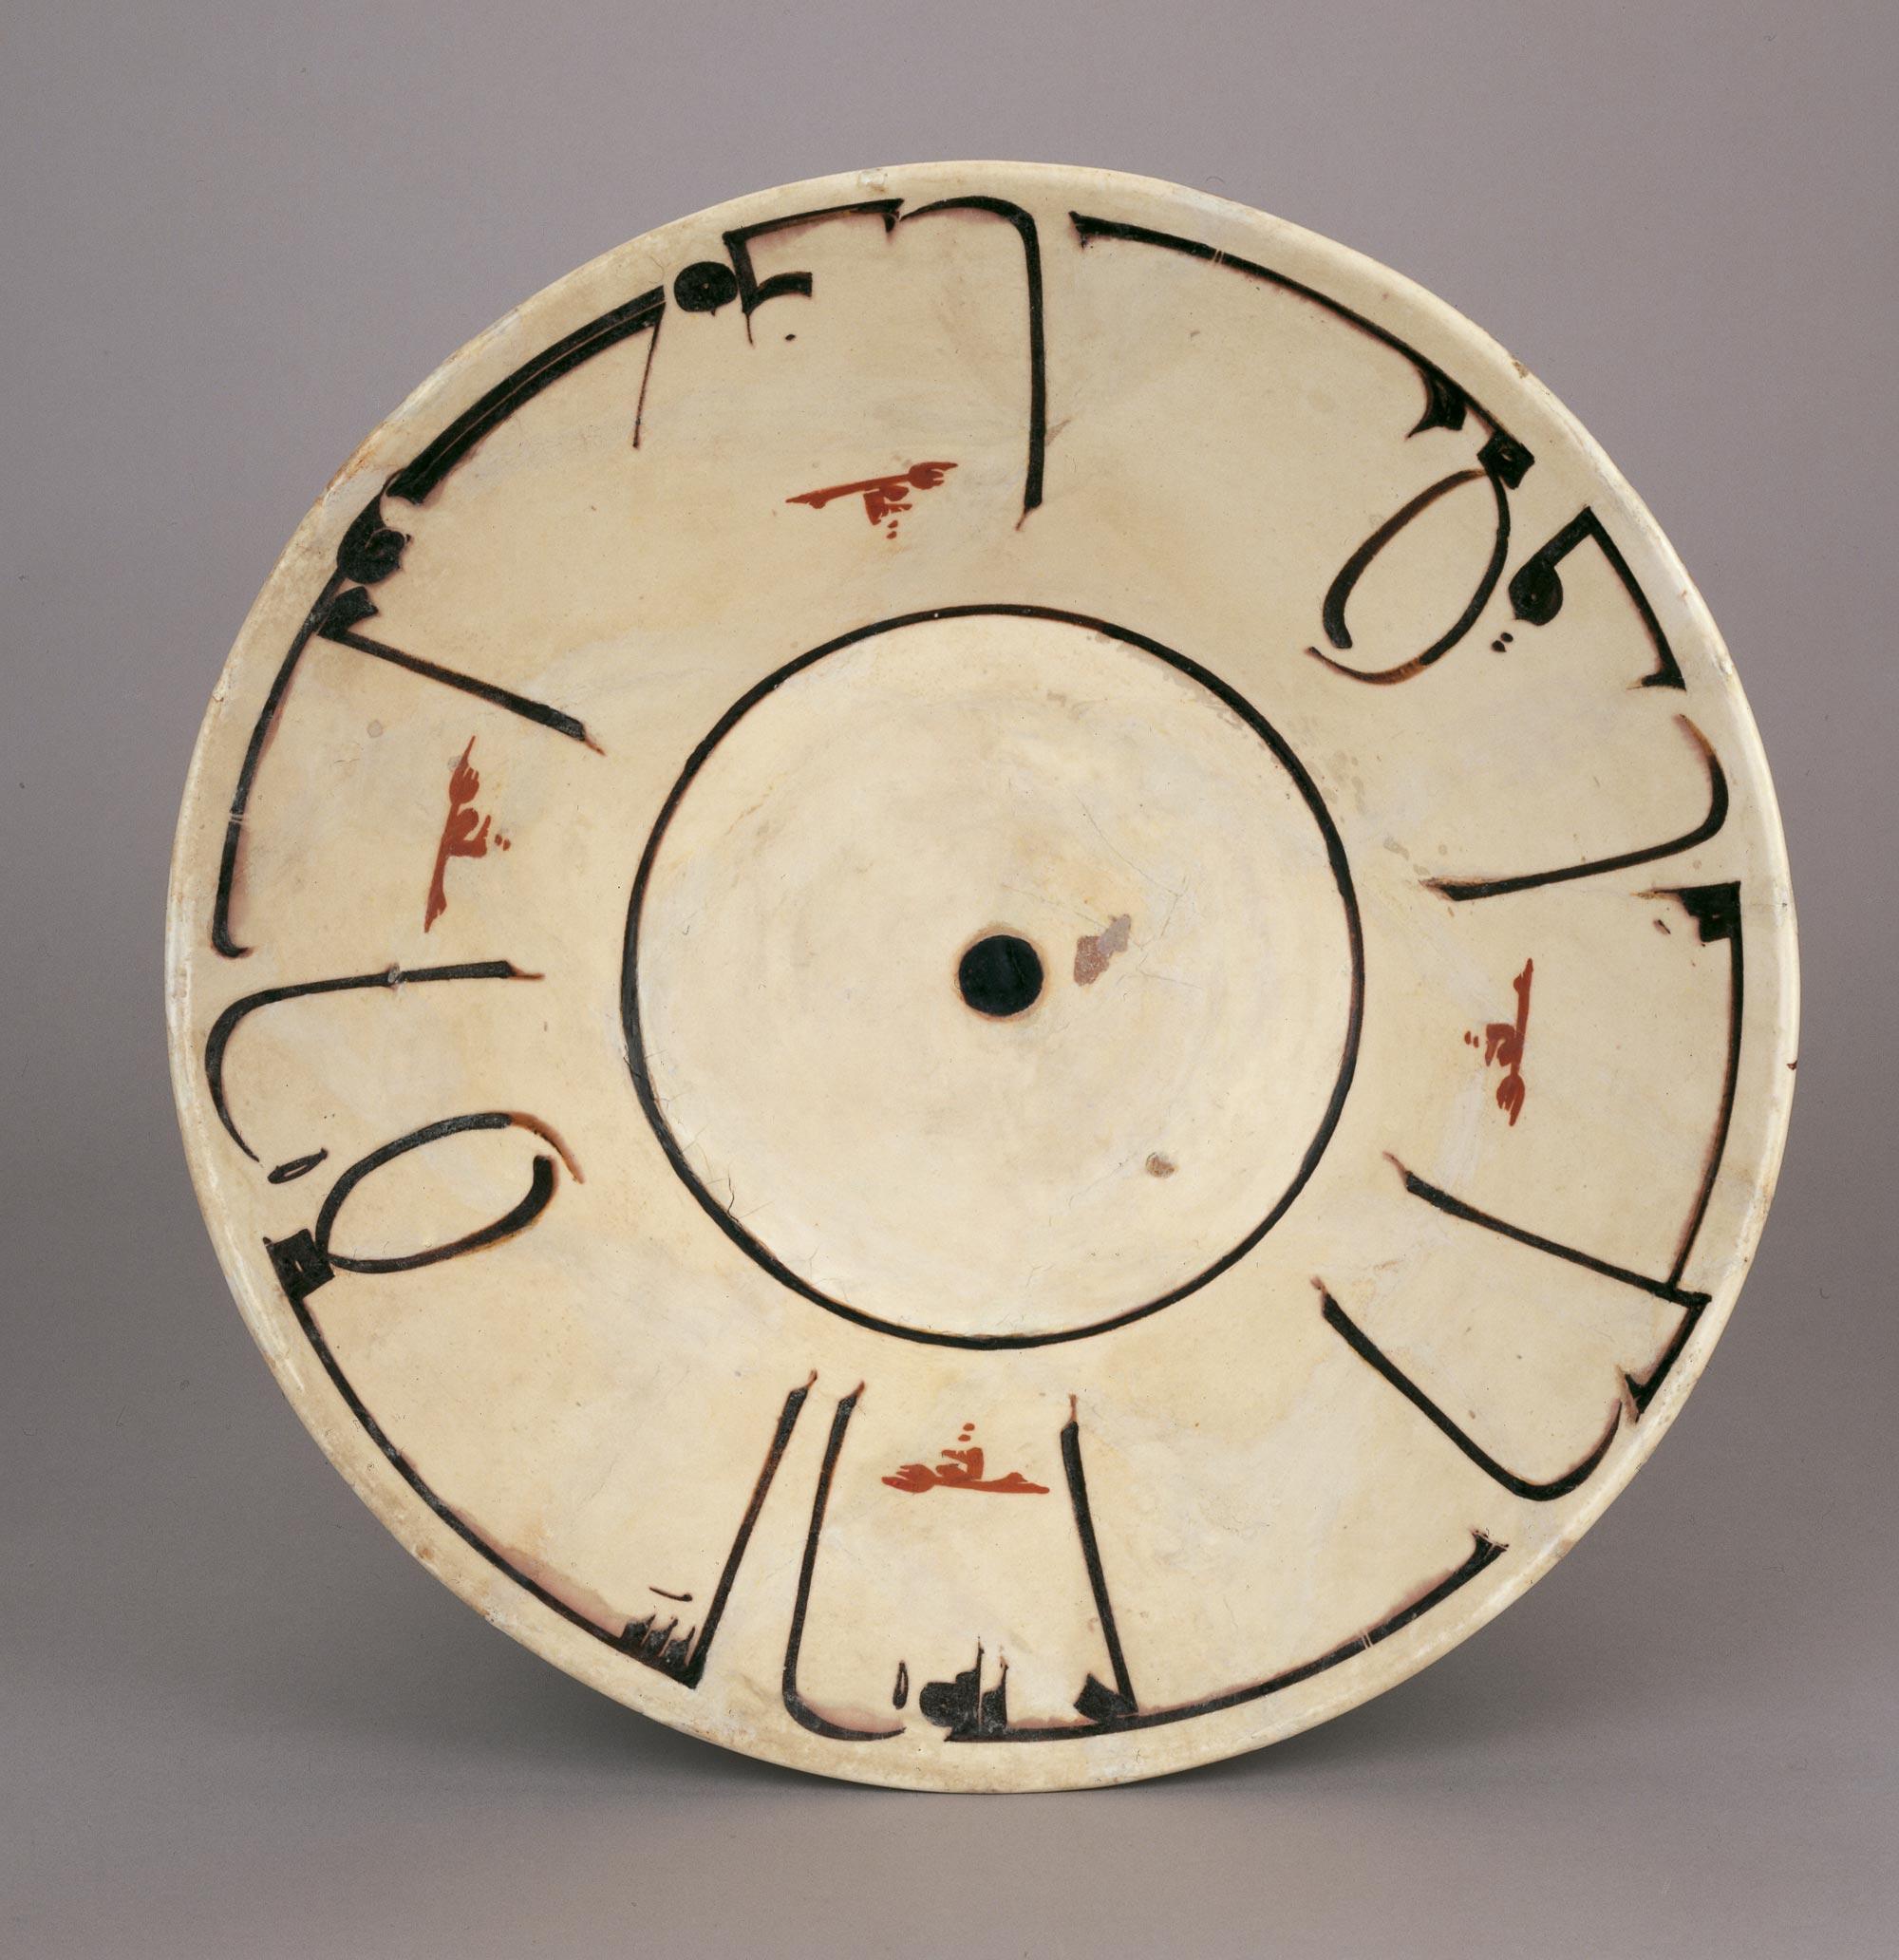 An off-white bowl from 10th-century Iran with black Arabic calligraphy around the perimeter.